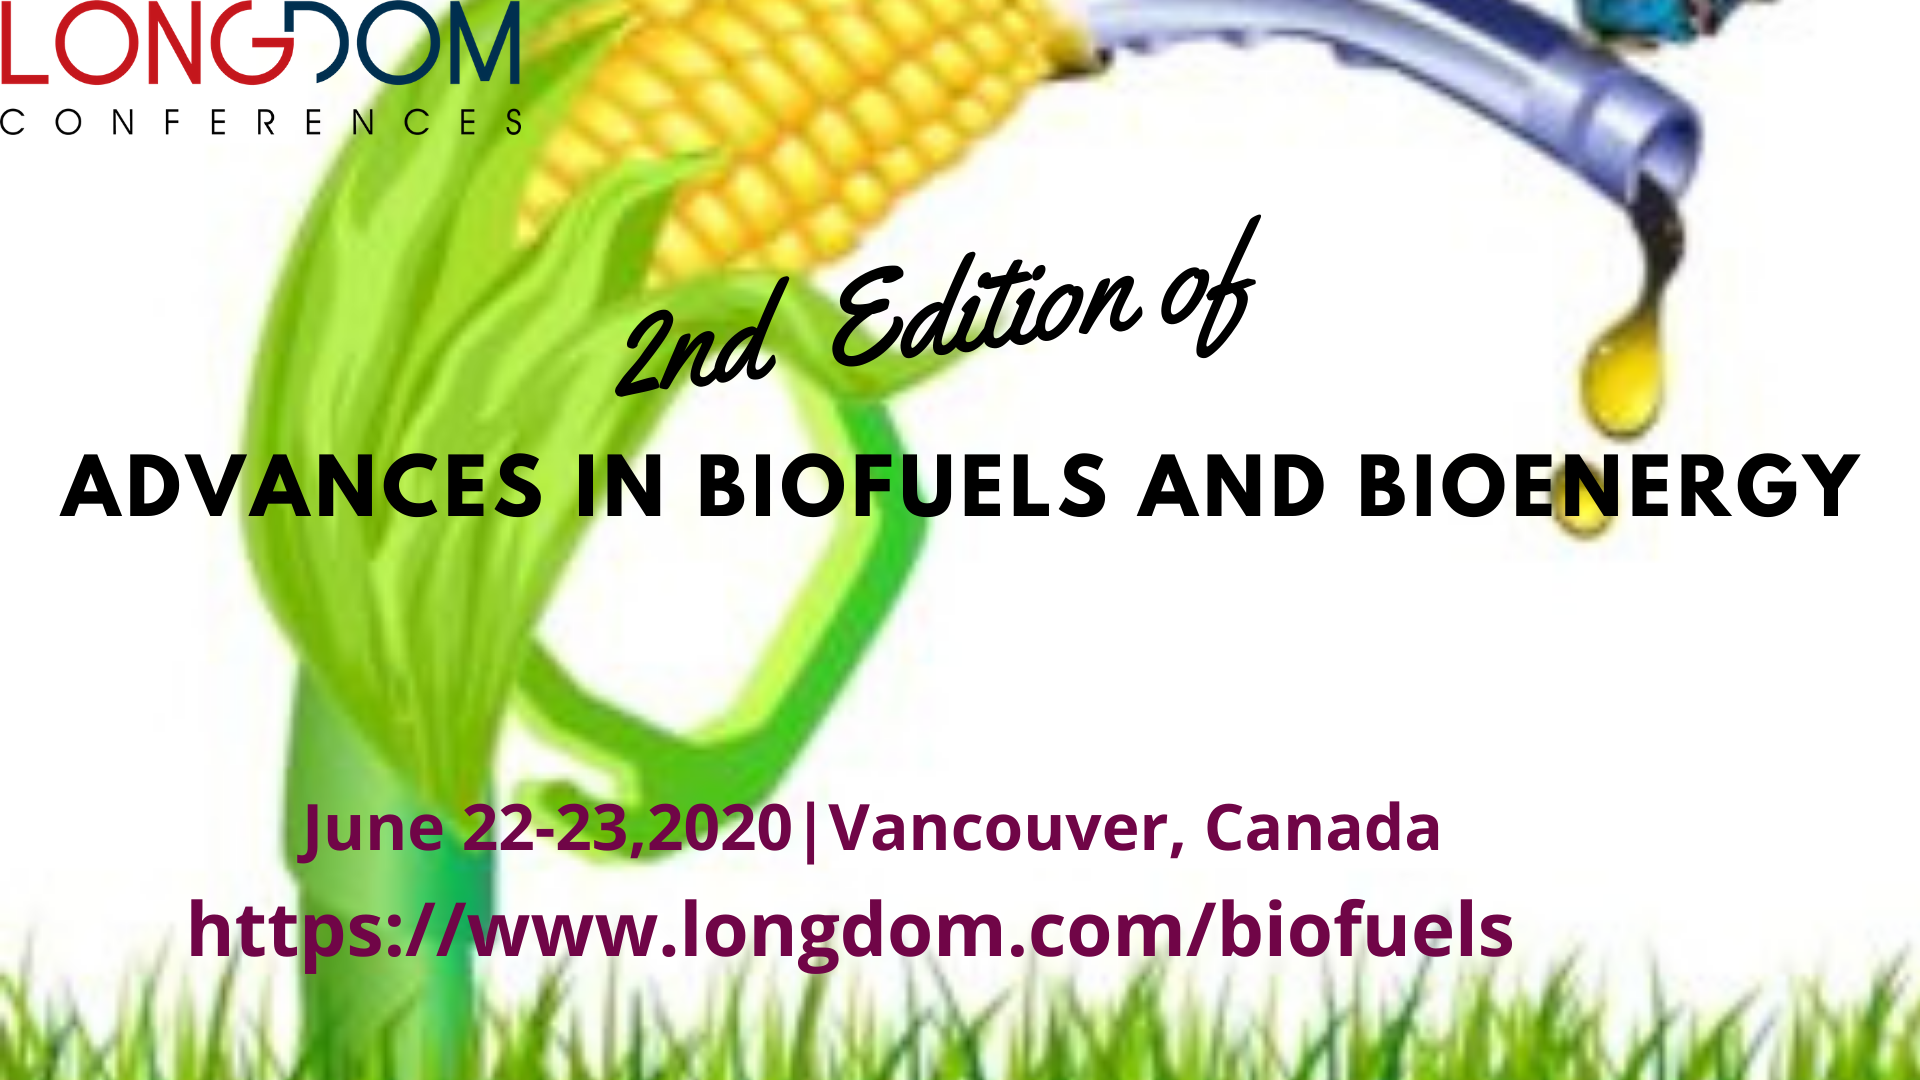 2nd Edition of Advances in Biofuels and Bioenergy